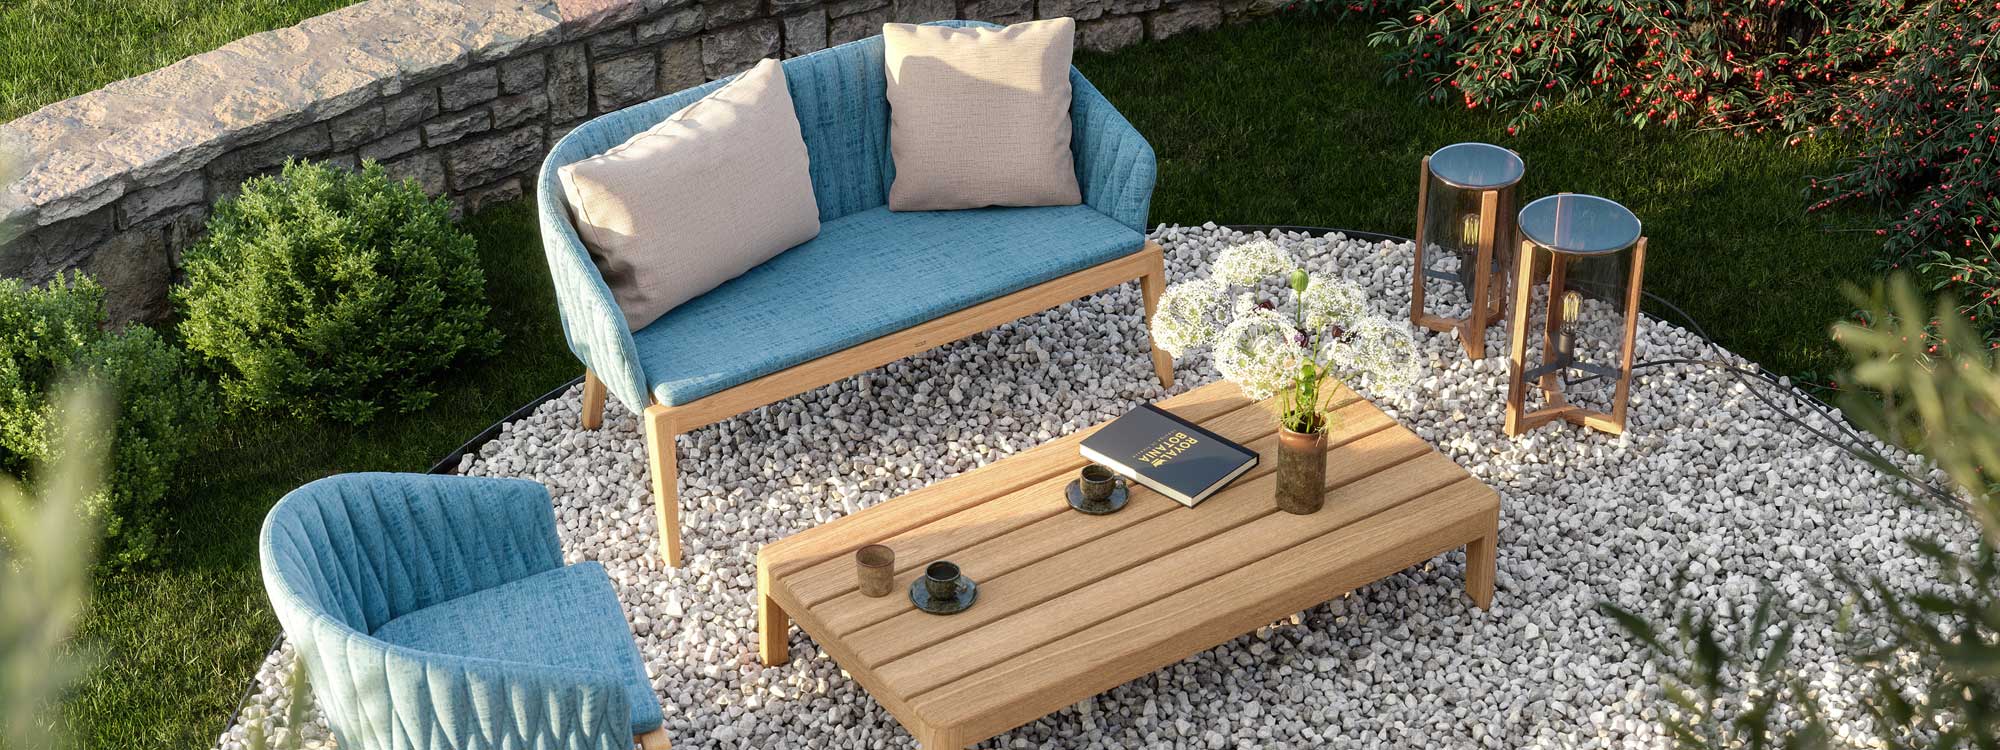 Birdseye view of Royal Botania Calypso outdoor sofa and table in teak with blue upholstery